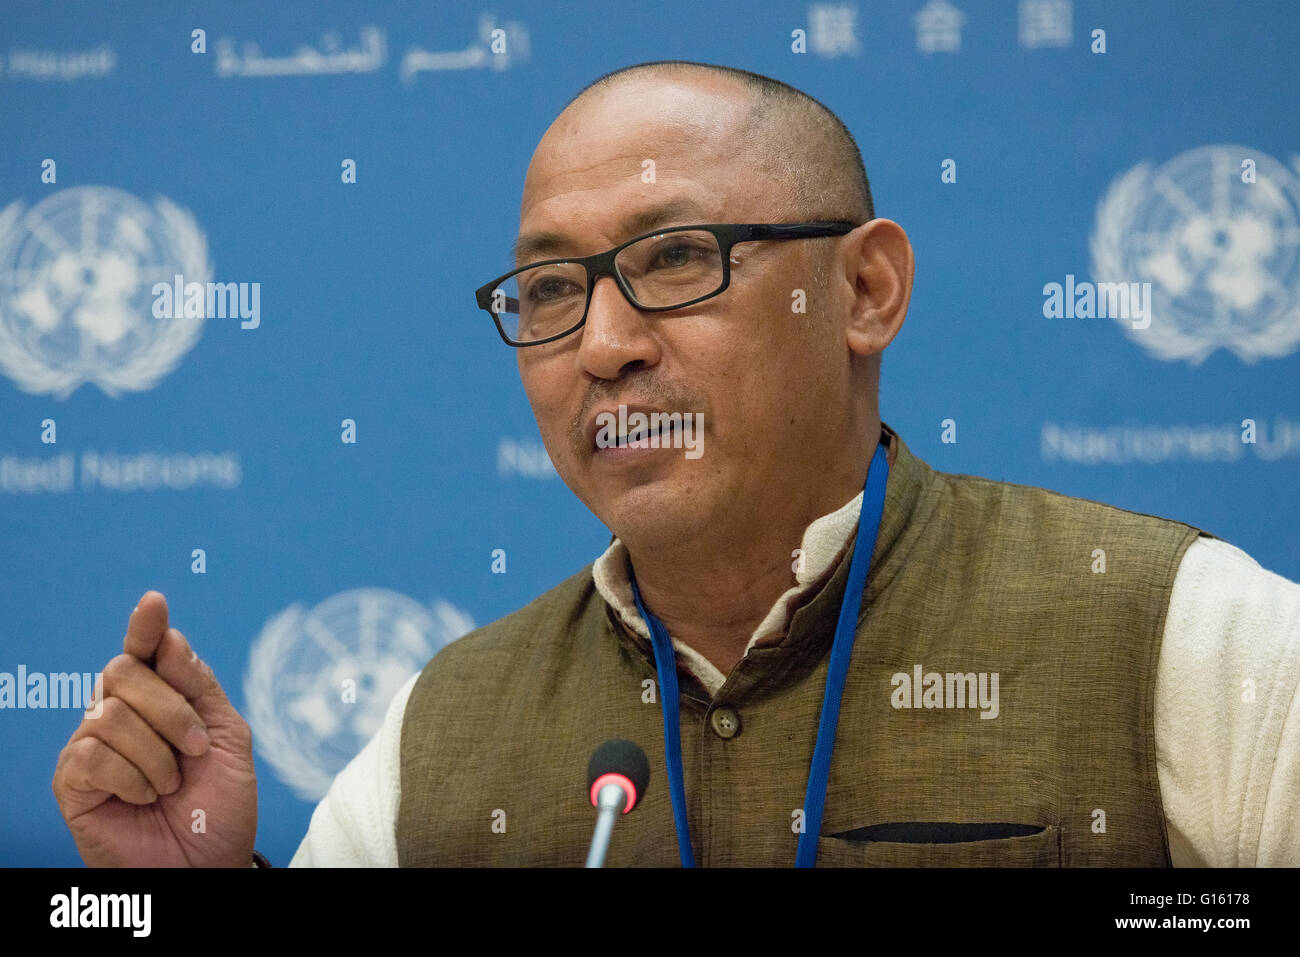 New York, United States. 09th May, 2016. Devasish Roy speaks with the press. In conjunction with the opening of the fifteenth session of the United Nations Permanent Forum on Indigenous Issues (UNPFII15), incoming Chair of the Forum Alvaro Pop, Forum Member Devasish Roy, and Canadian Minister of Indigenous and Northern Affairs spoke at a press conference at UN Headquarters in New York City, outlining key areas of concern for the Forum. © Albin Lohr-Jones/Pacific Press/Alamy Live News Stock Photo